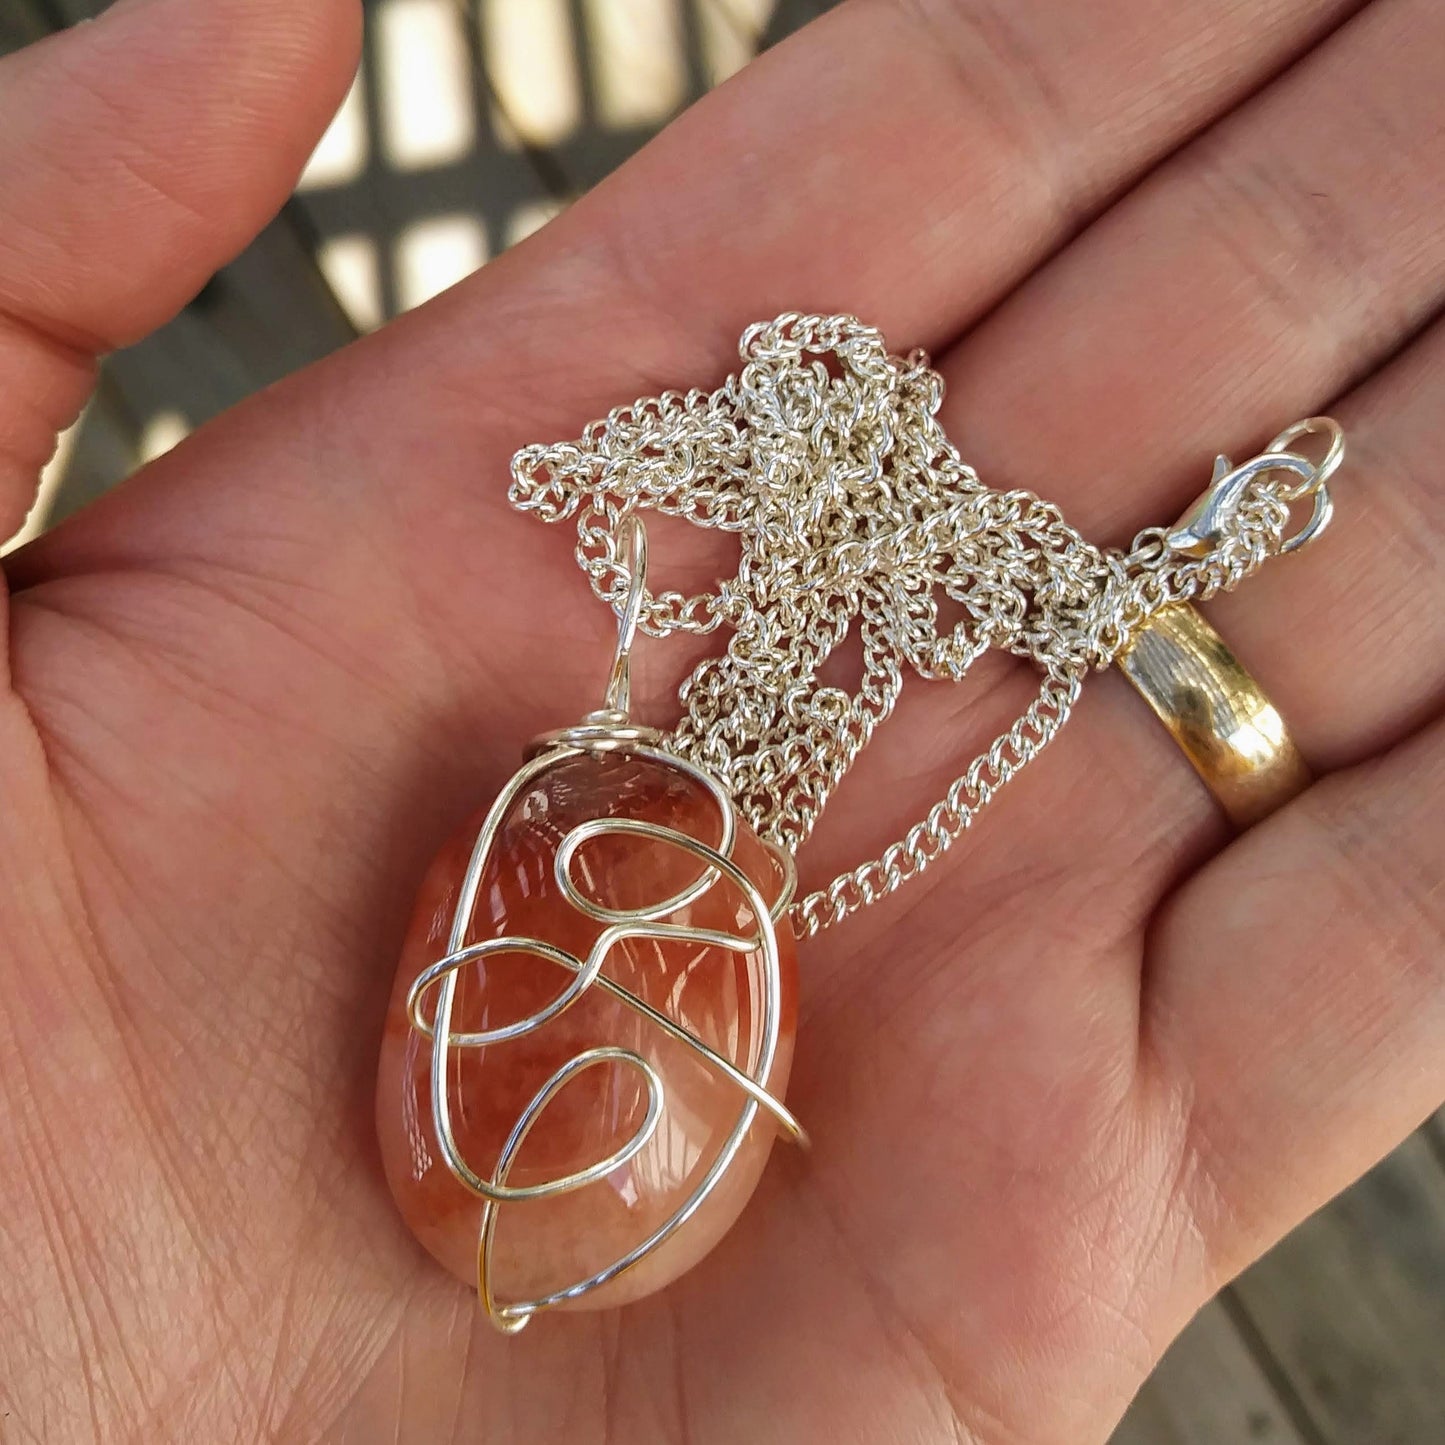 Crazy Wire Wrapped Upcycled Large Pink Gemstone Pendant